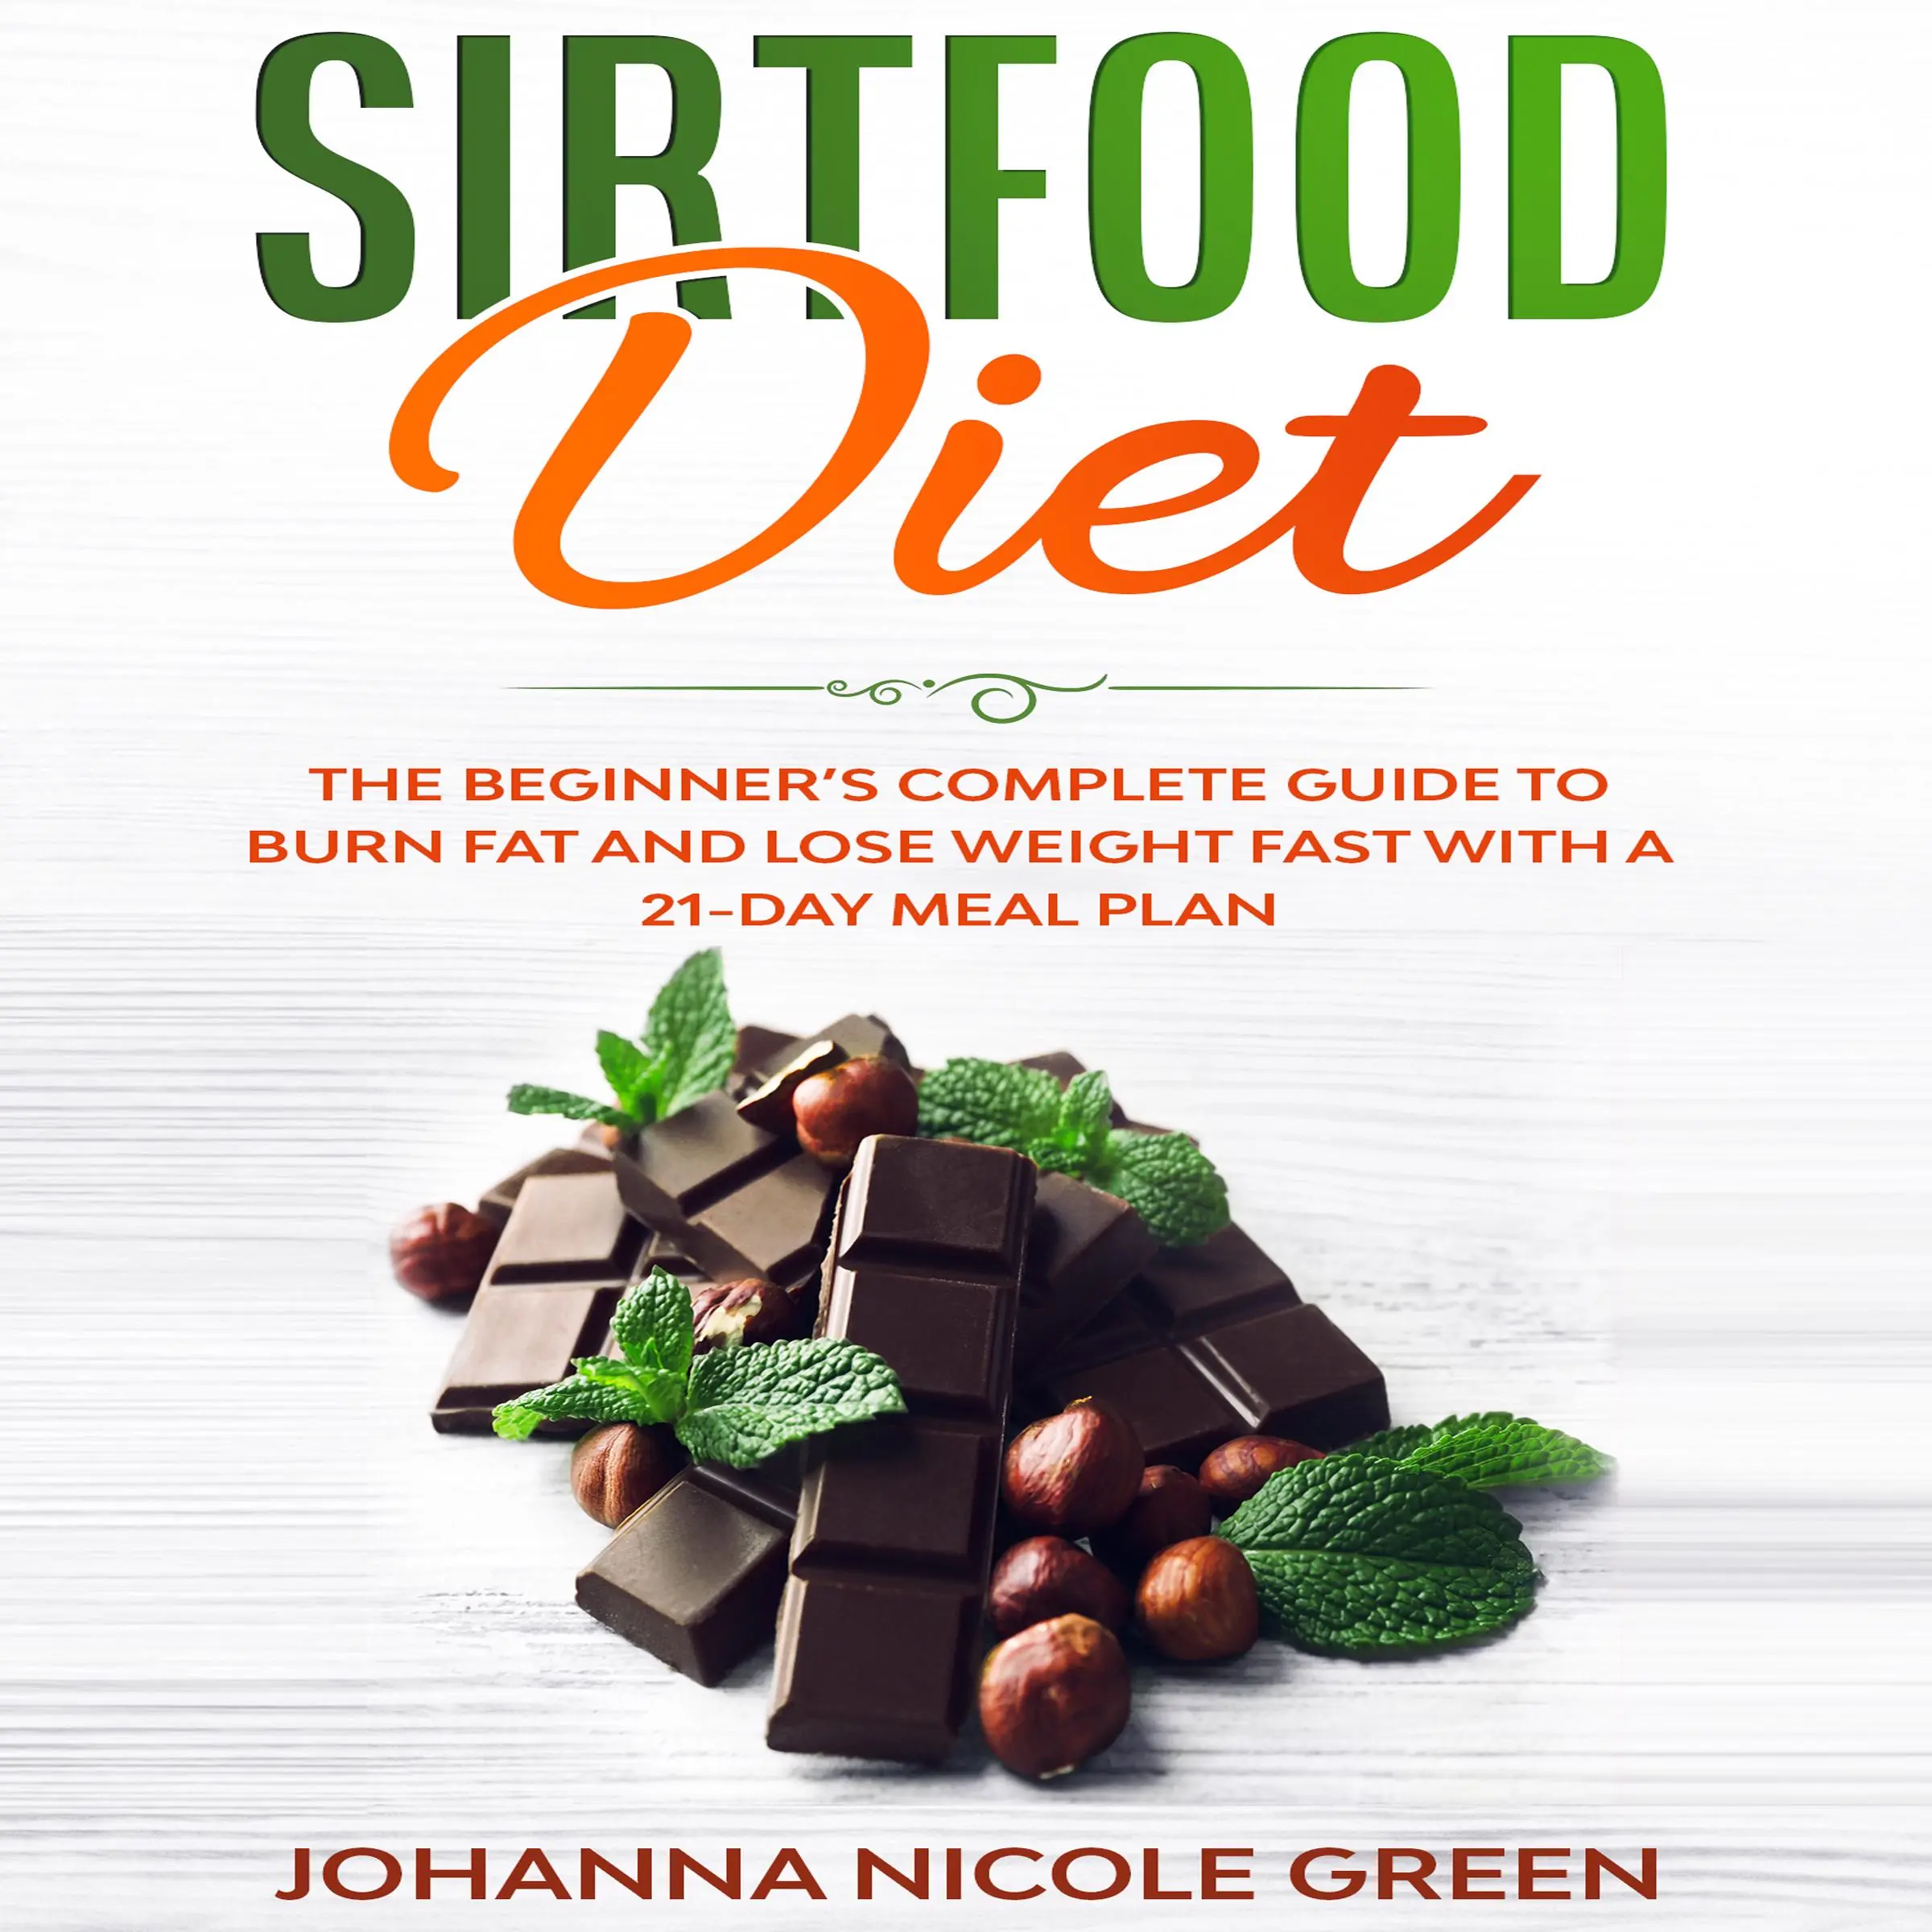 Sirtfood Diet: The Beginner’s Complete Guide to Burn Fat and Lose Weight Fast with a 21-Day Meal Plan Audiobook by Johanna Nicole Green